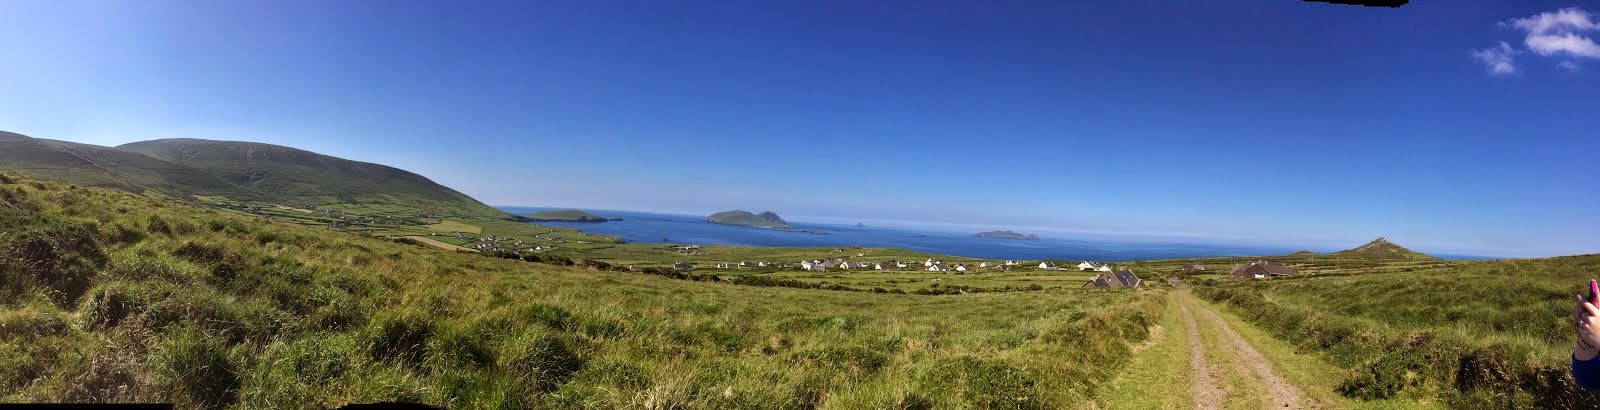 The Walk Out of Dunquin